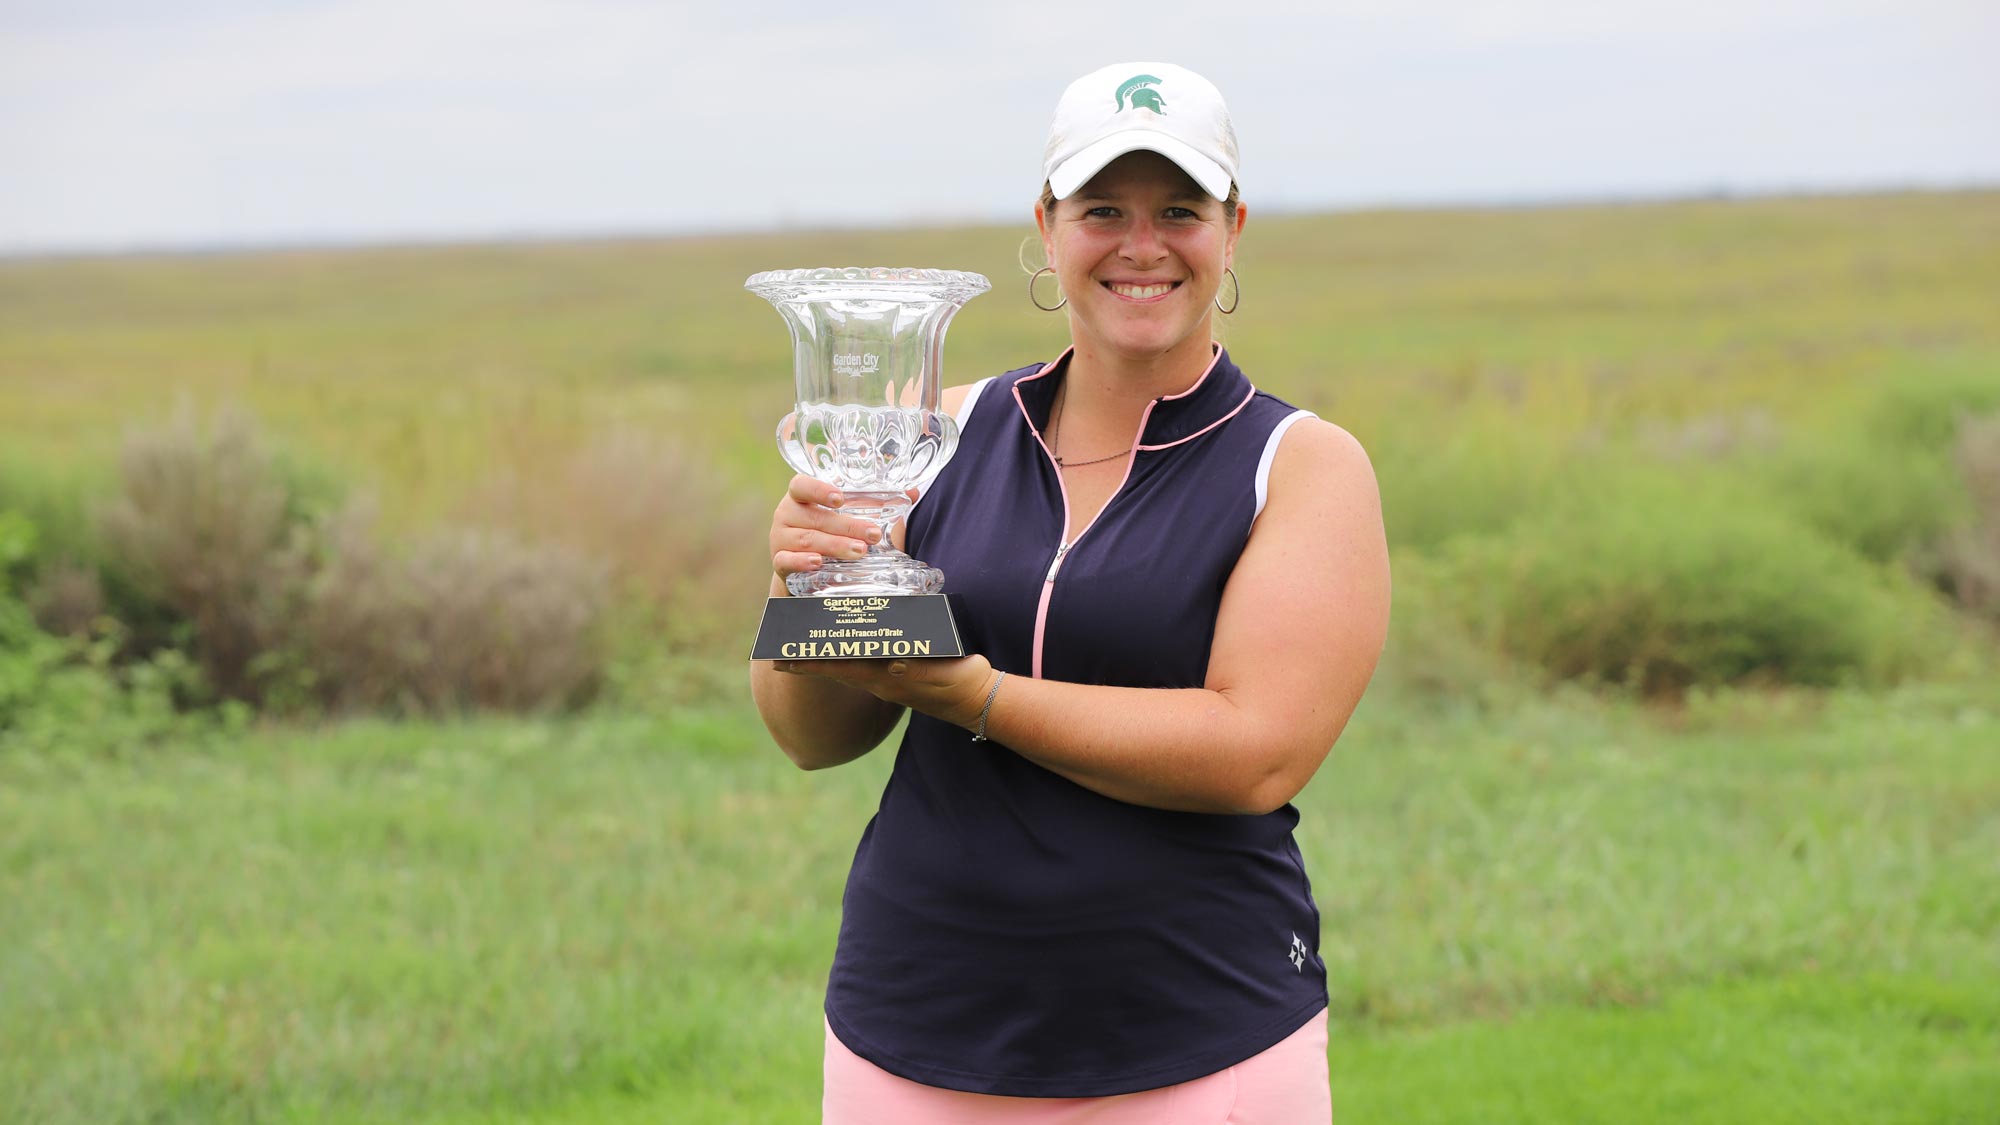 Allyssa Ferrel with the trophy at the Garden City Charity Classic